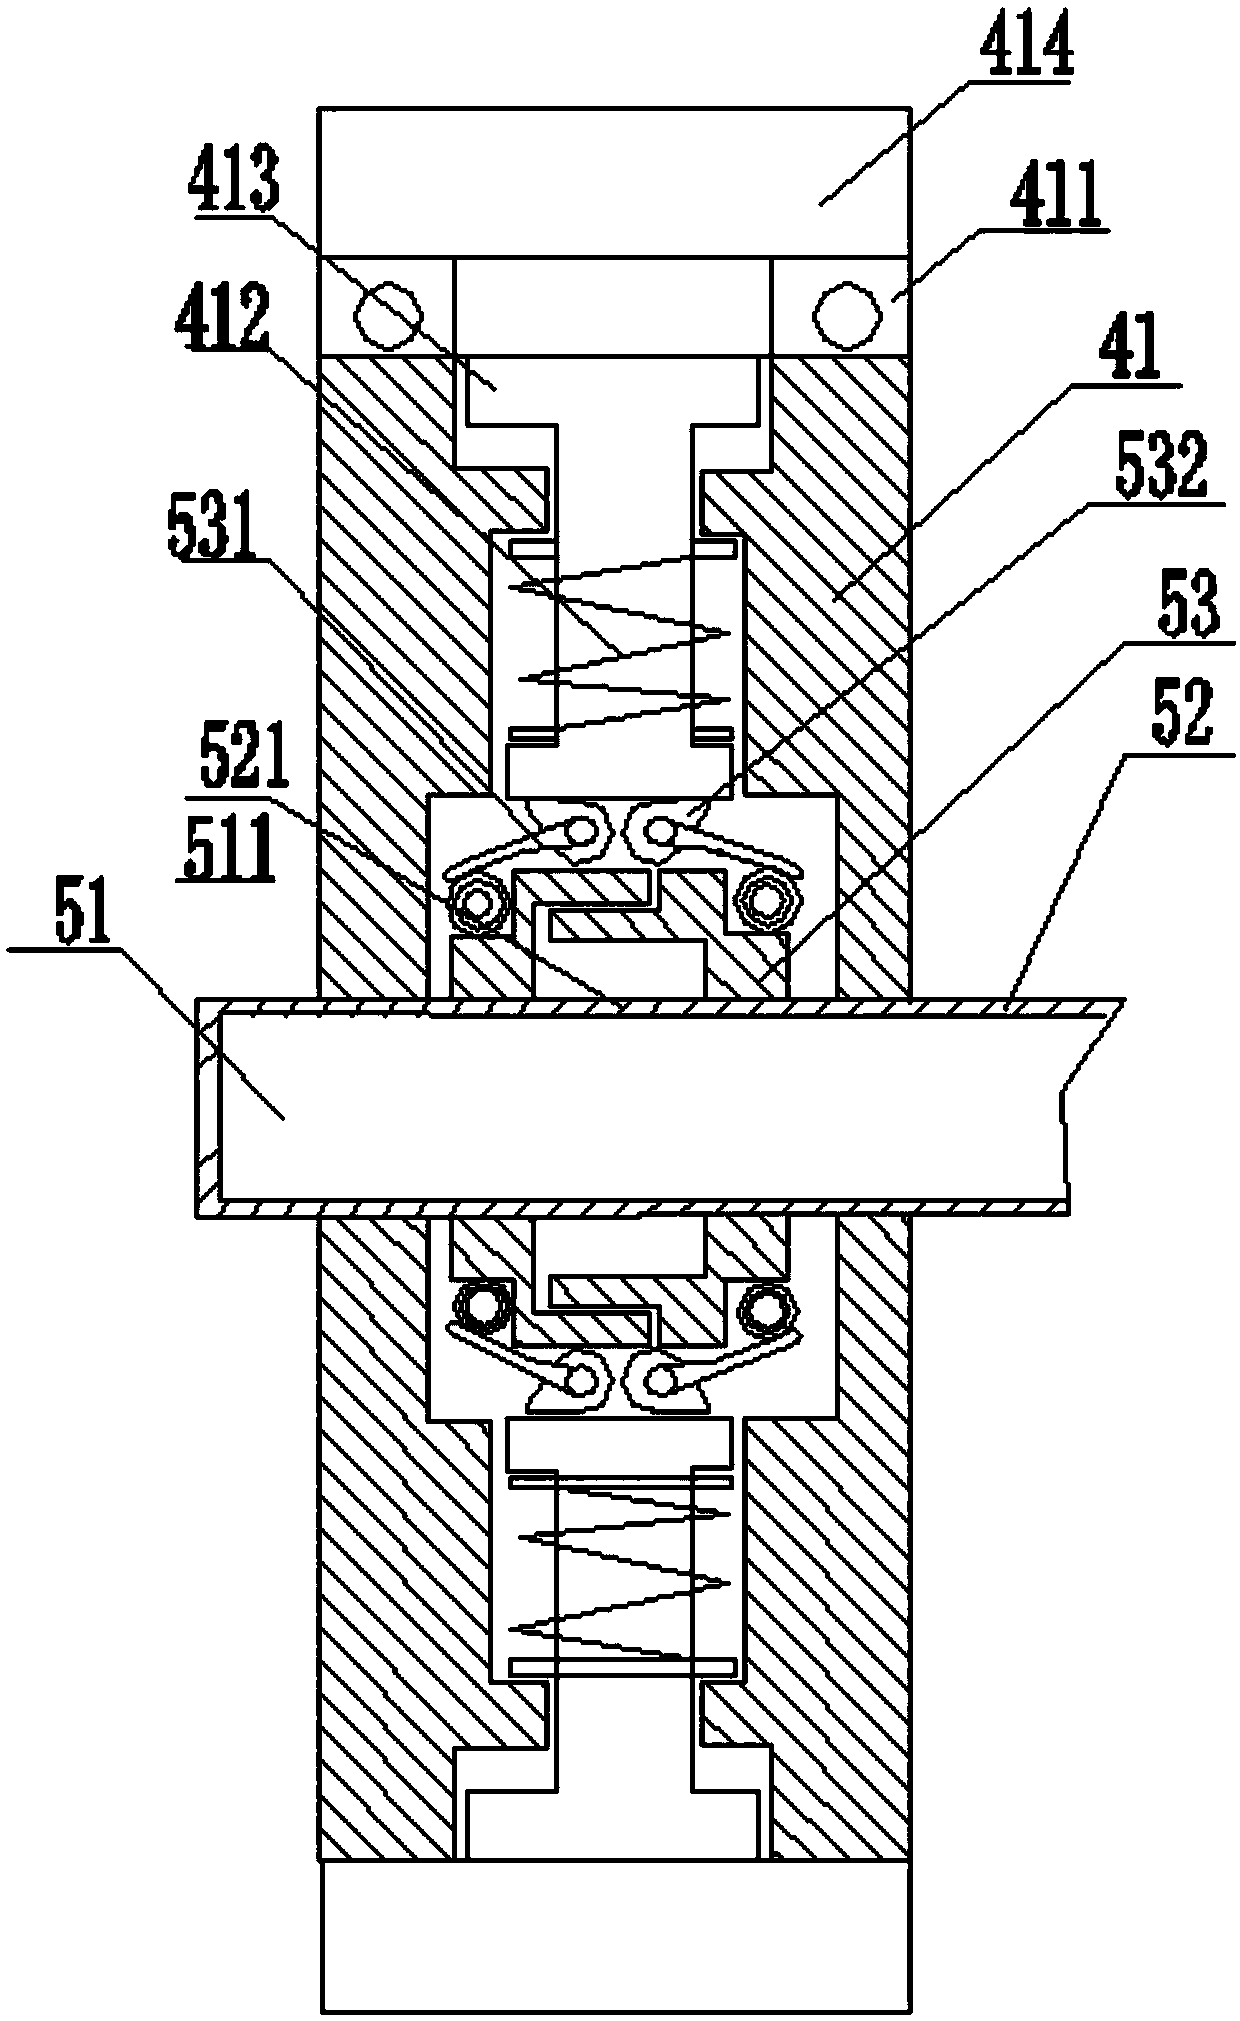 A stepless power-assisted hydraulically controlled shift gearbox